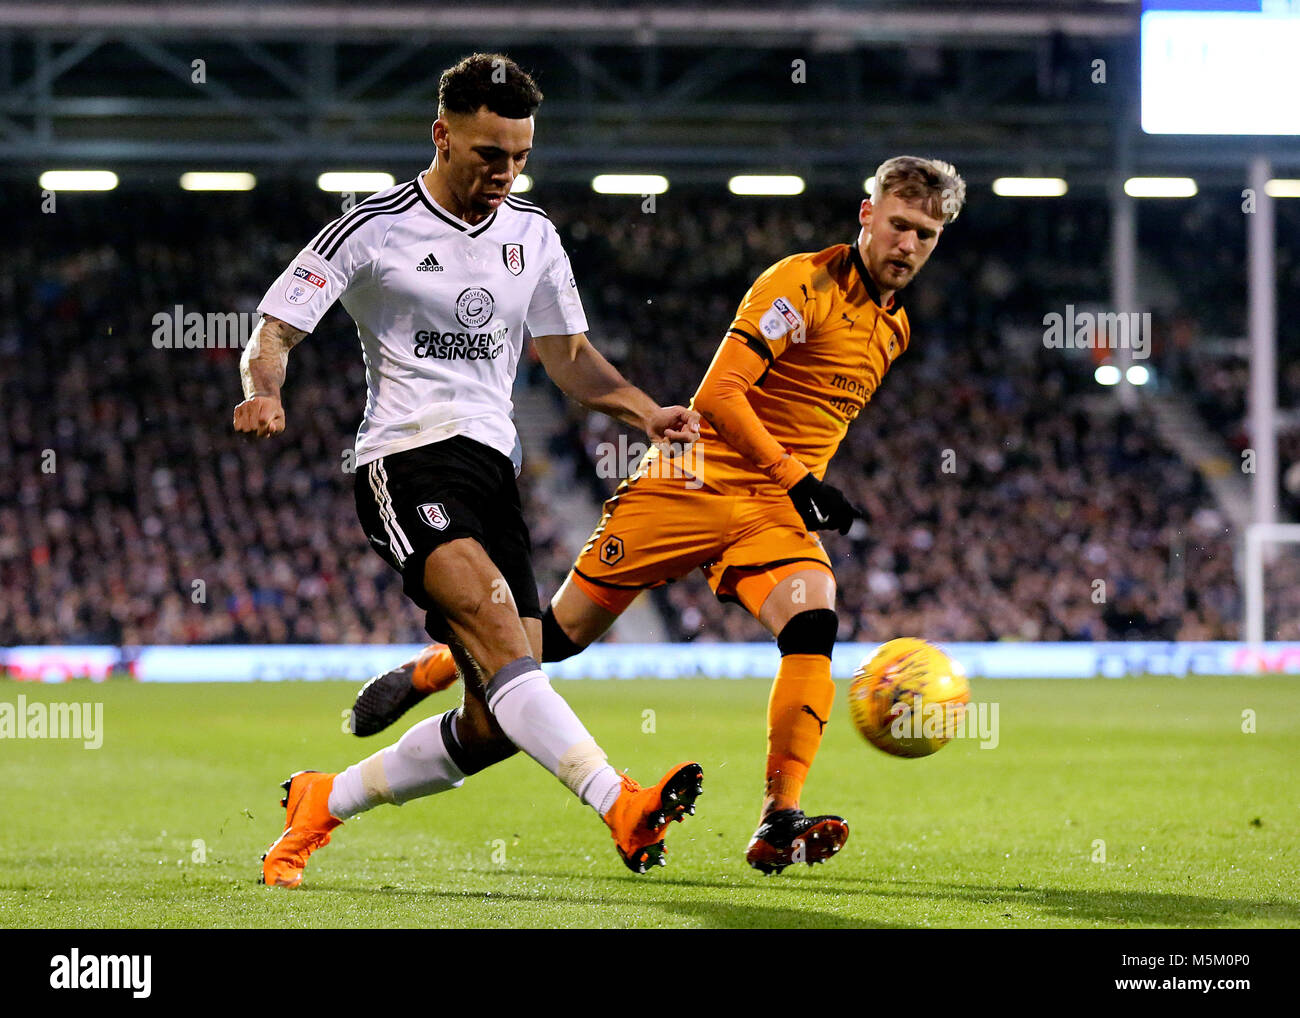 Fulham's Ryan Fredericks beats Wolves Barry Douglas and crosses into the Wolves area during the Championship match at Craven Cottage, London. Stock Photo